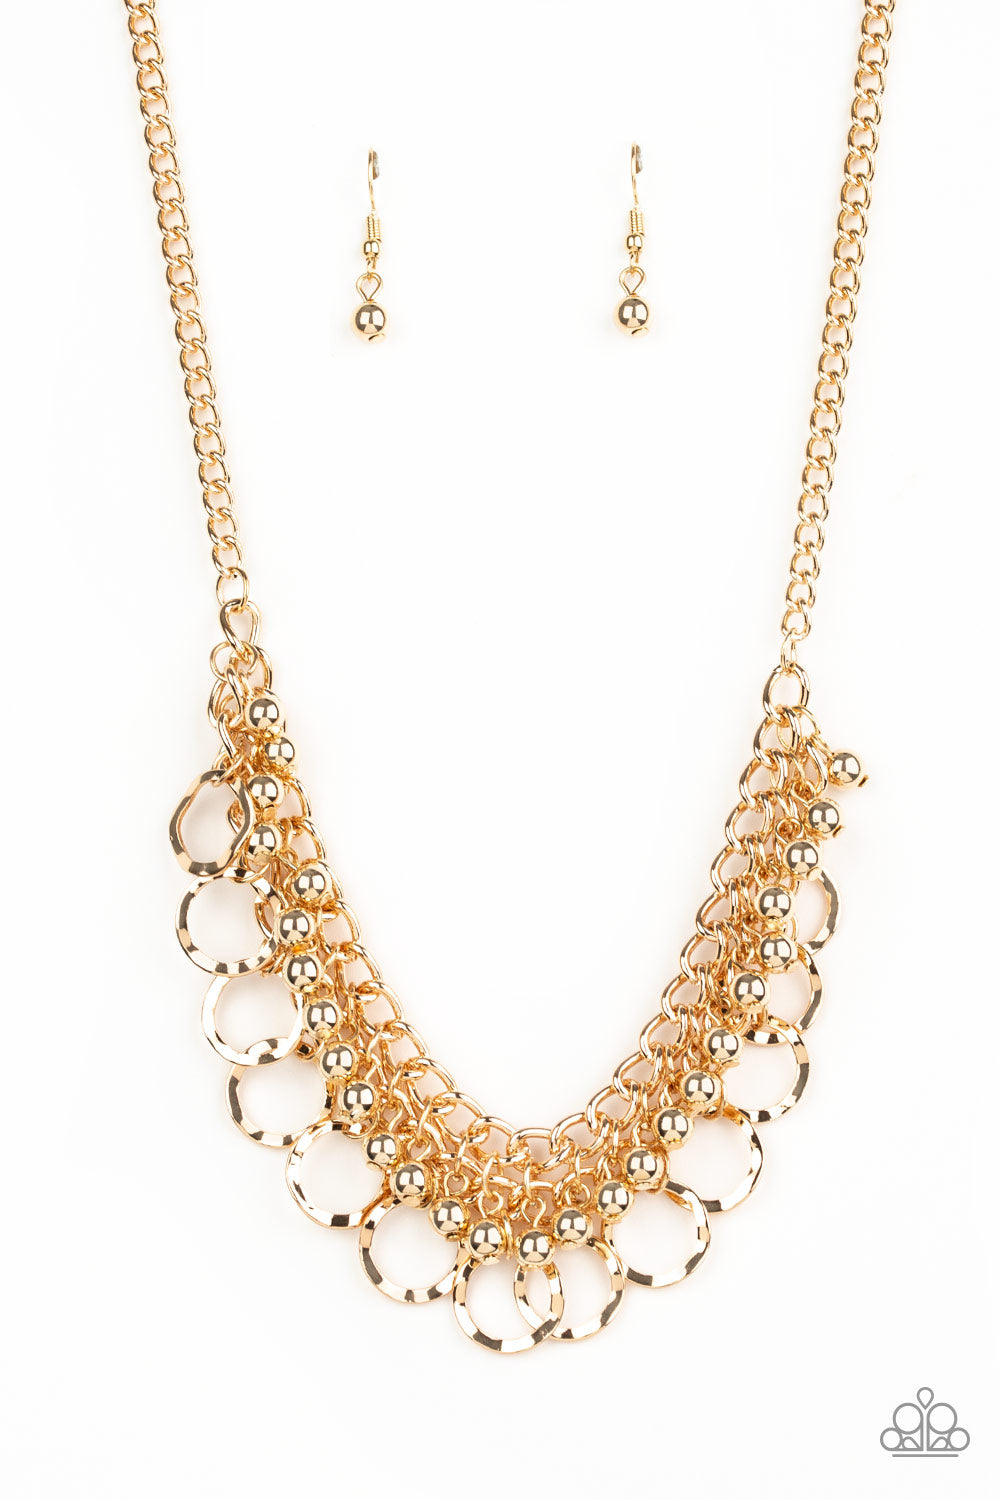 Ring Leader Radiance Gold - Necklace - Paparazzi Accessories